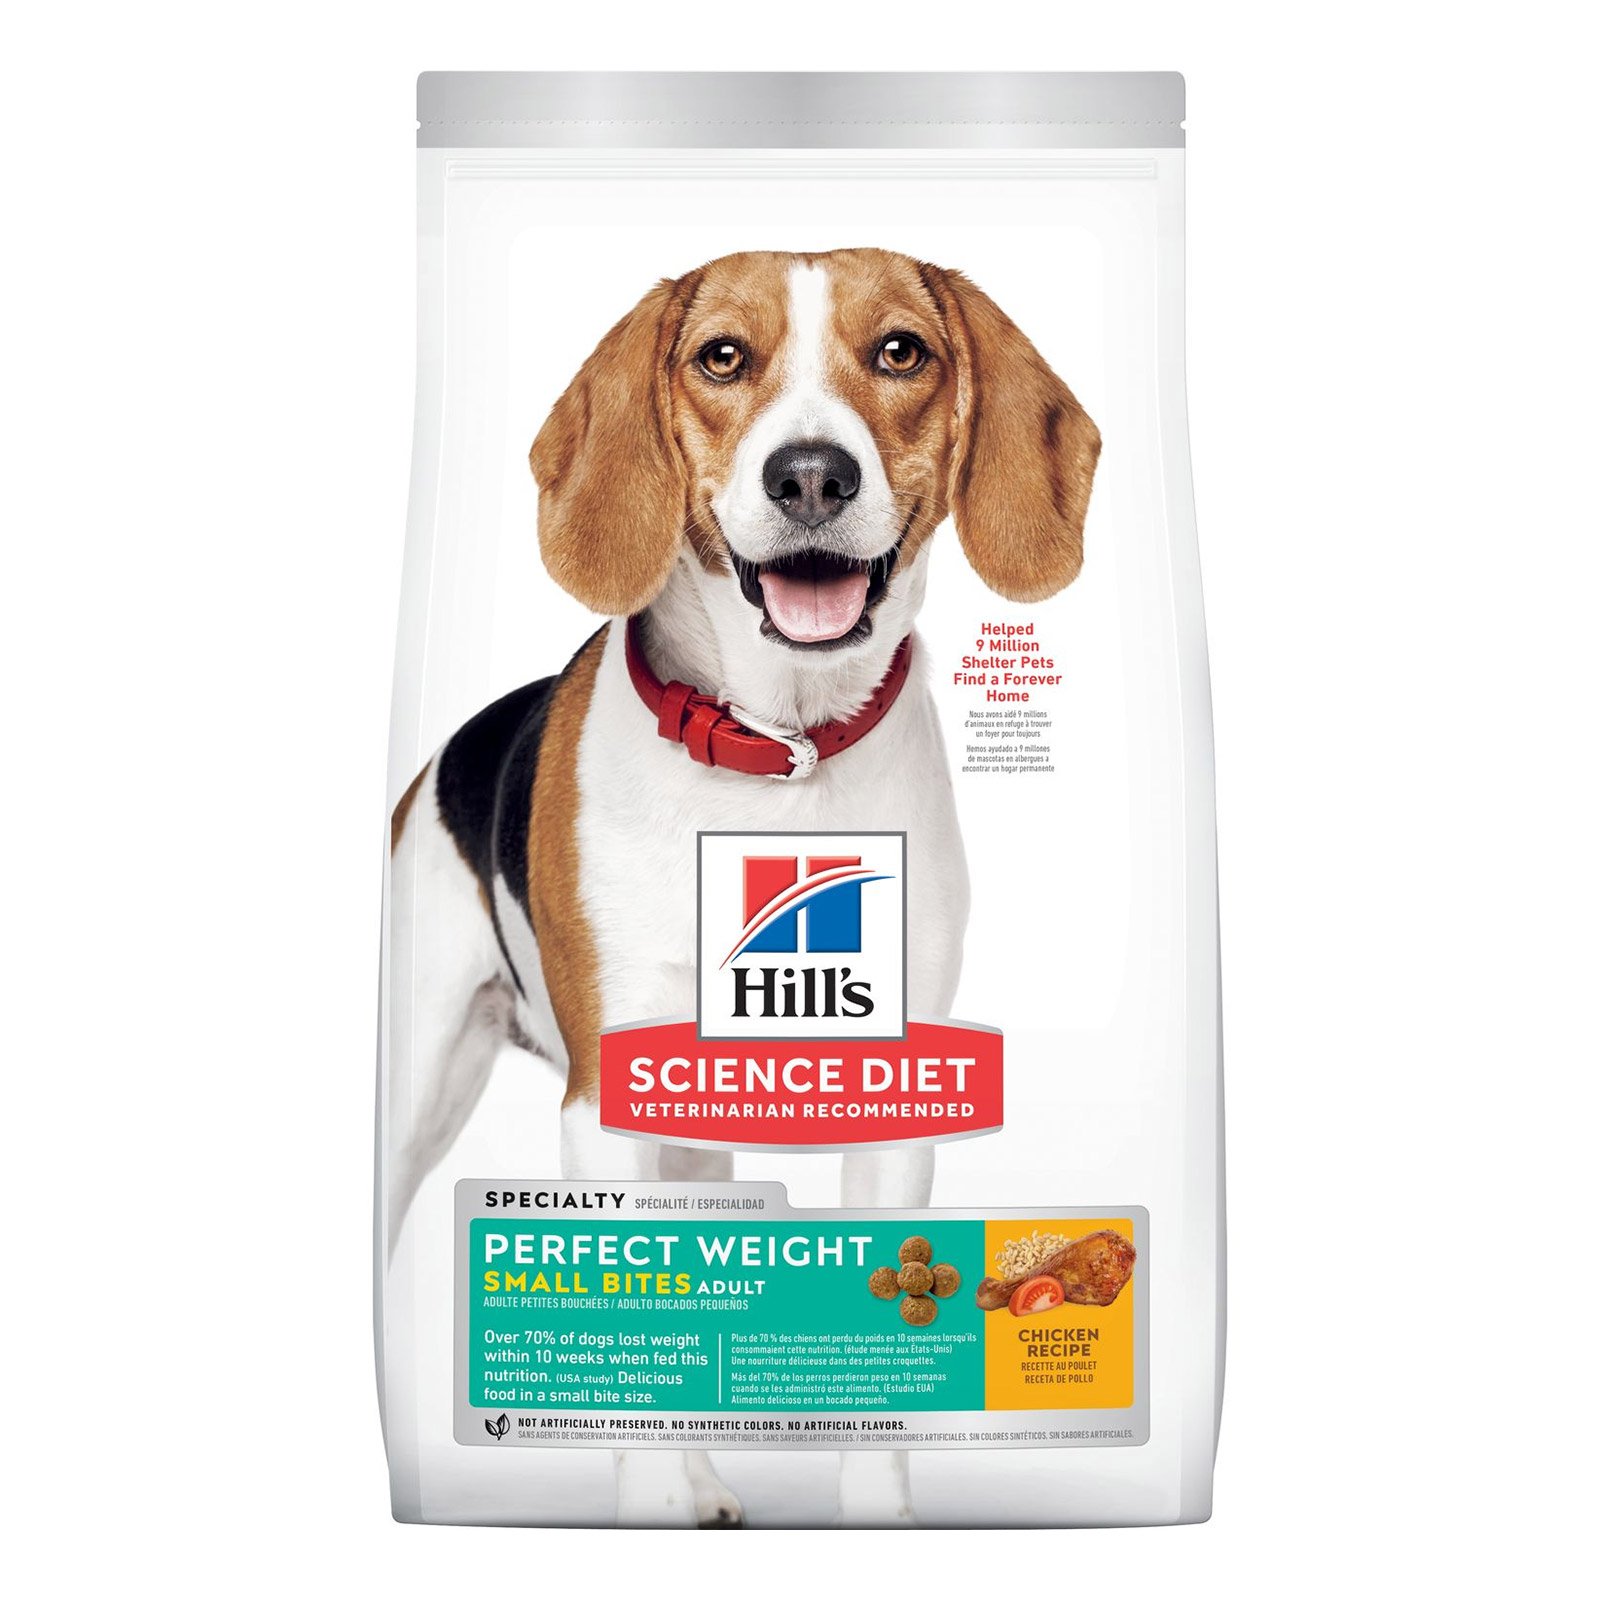 Hill's Science Diet Perfect Weight Small Bites Adult Dry Dog Food